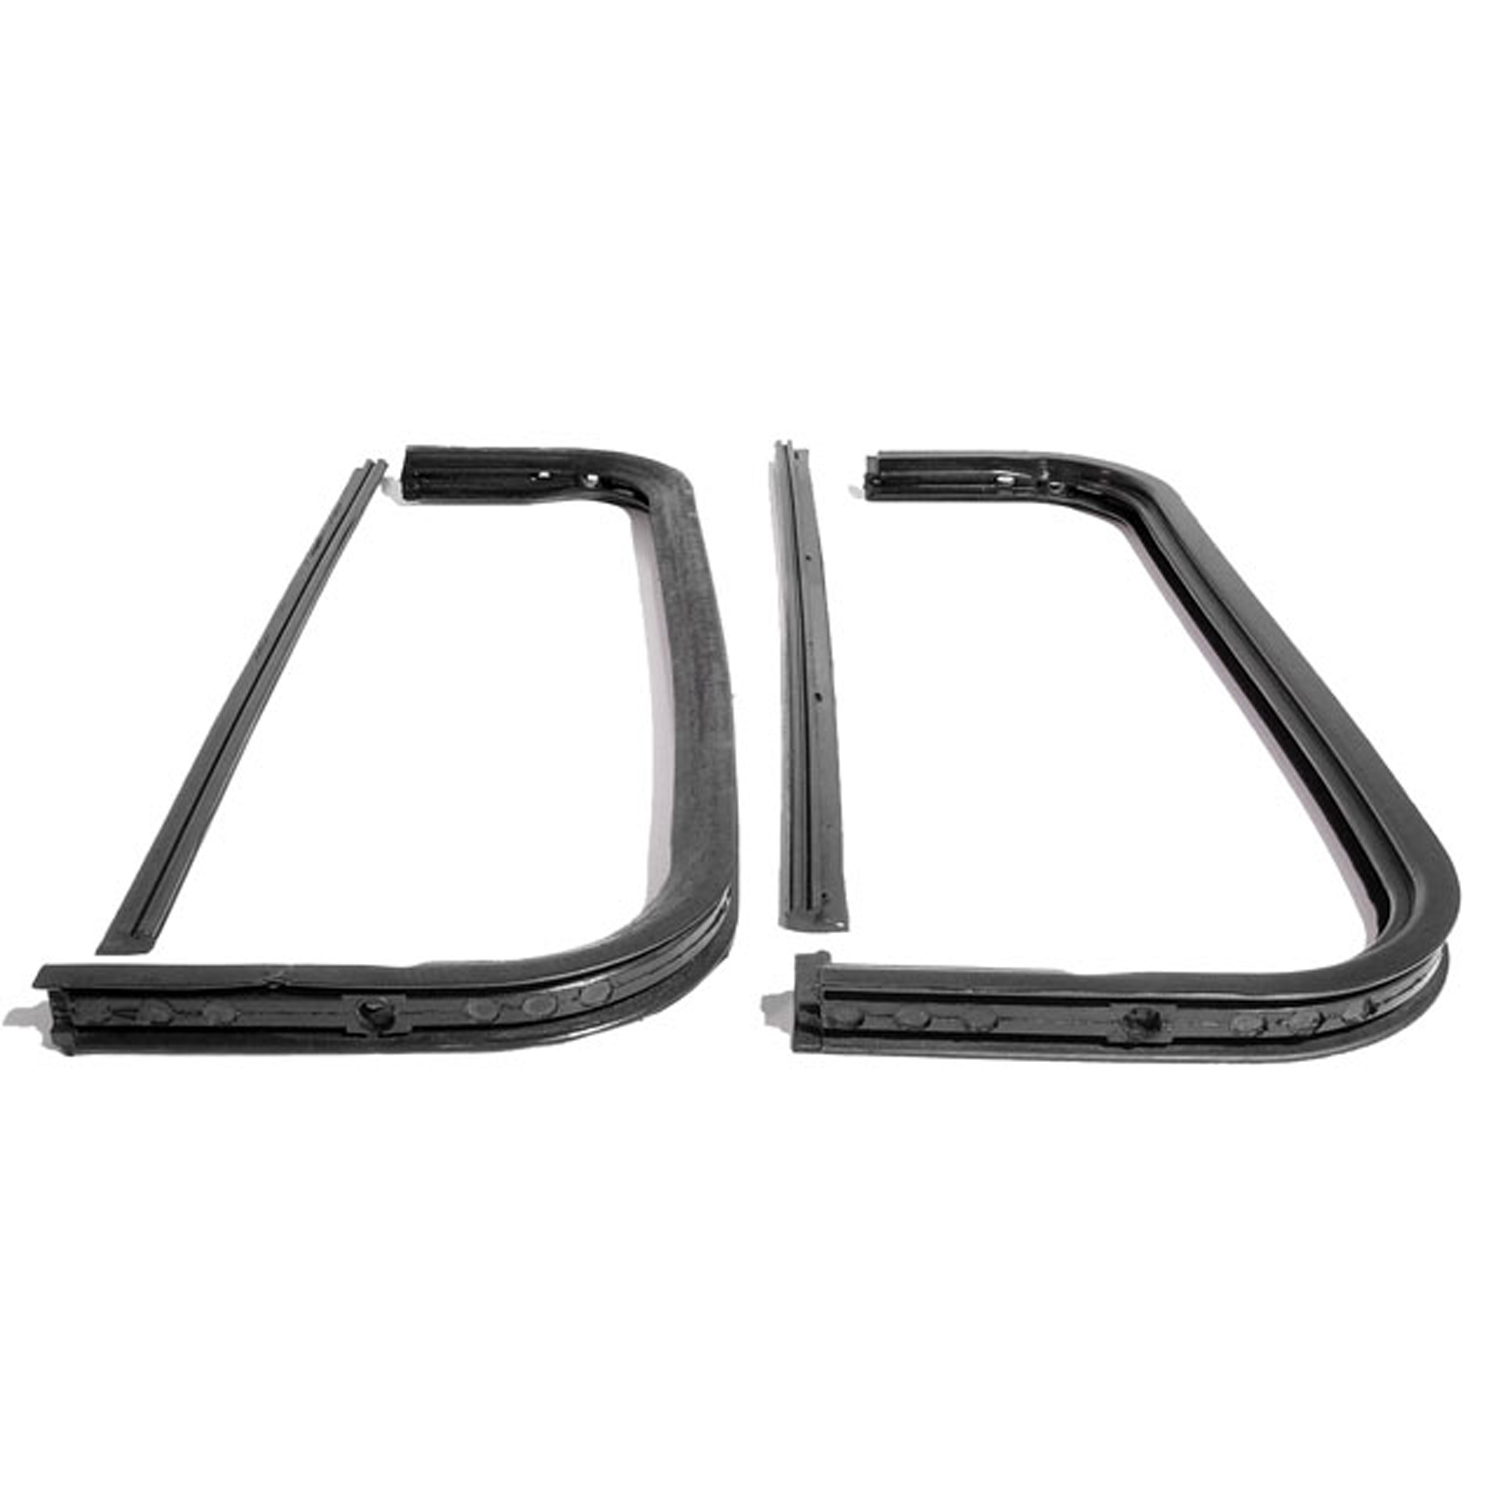 1962 Chevrolet C30 Pickup Vent Window Seals with Division Post Seals-WR 1900